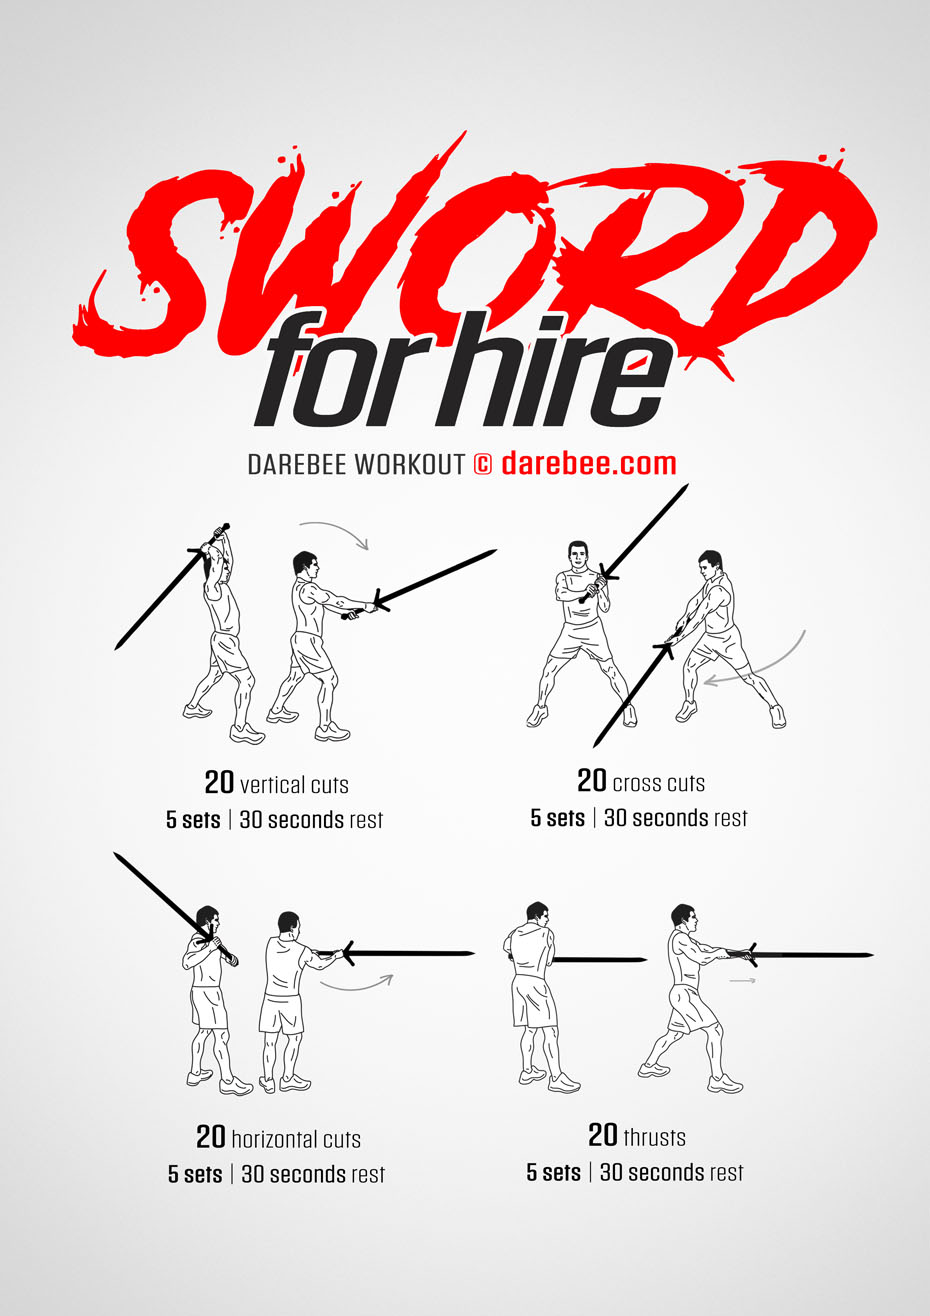 Sword For Hire is a DAREBEE home fitness RPG-Fitness workout that immerses your mind and body into a new plane of action for a little while.